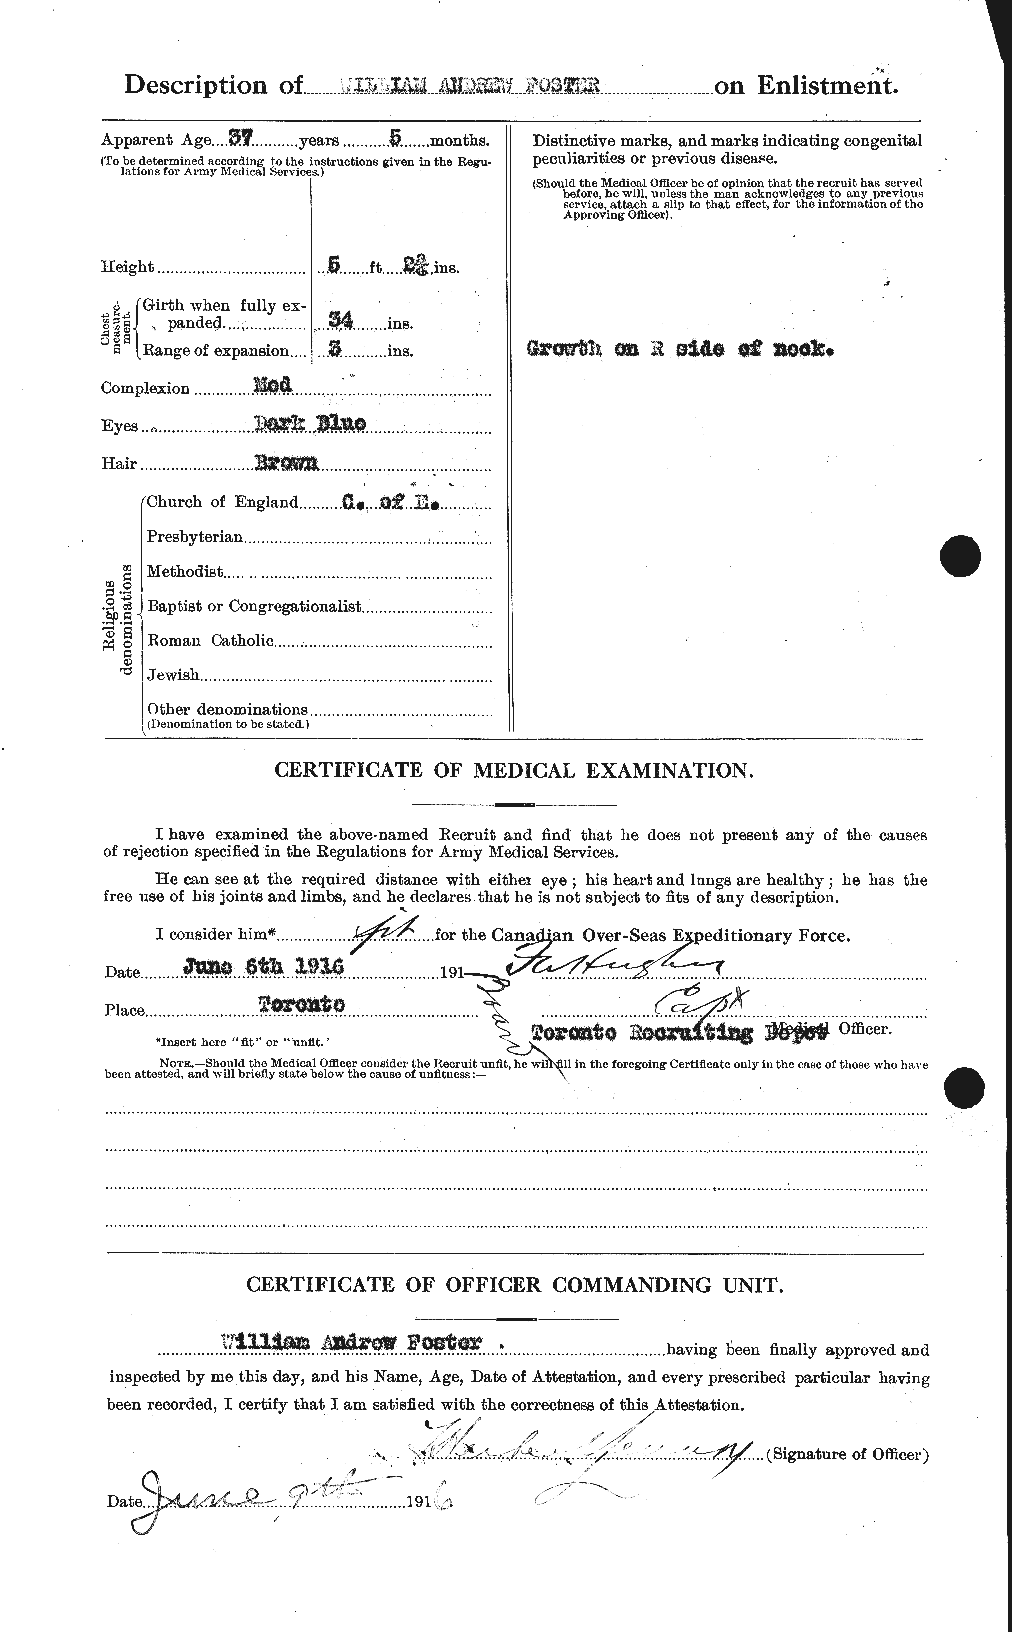 Personnel Records of the First World War - CEF 328728b